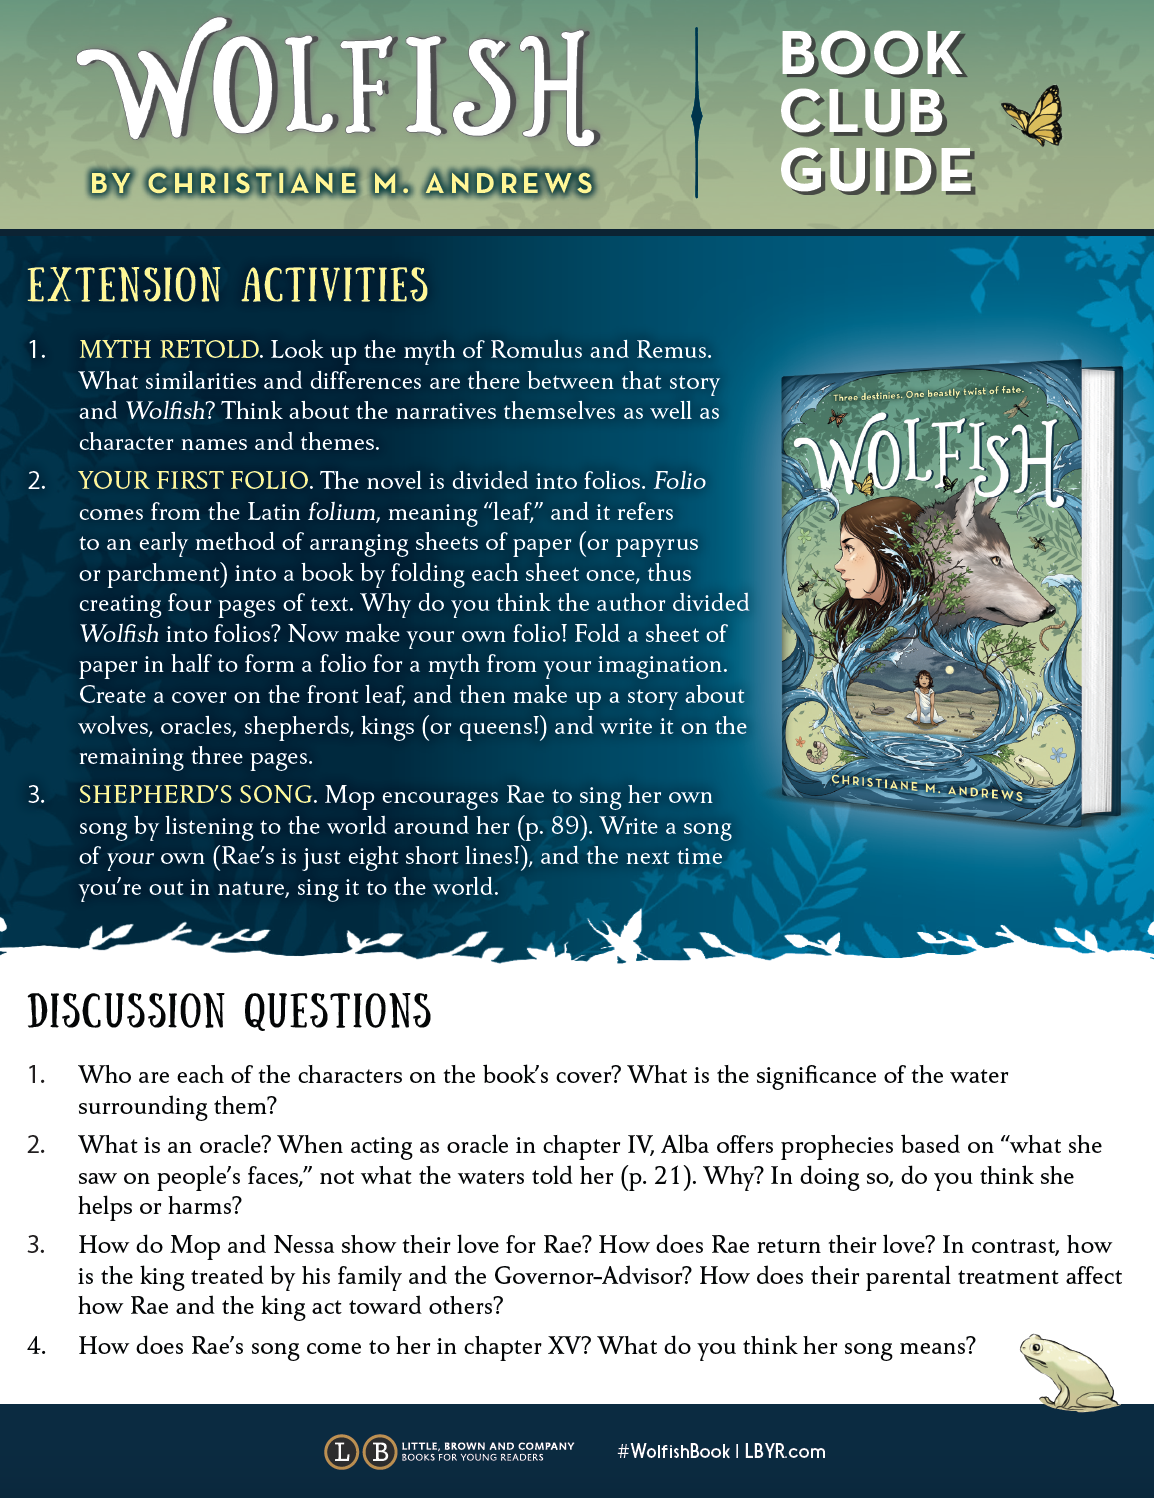 Book club guide for Wolfish by Christiane M. Andrews